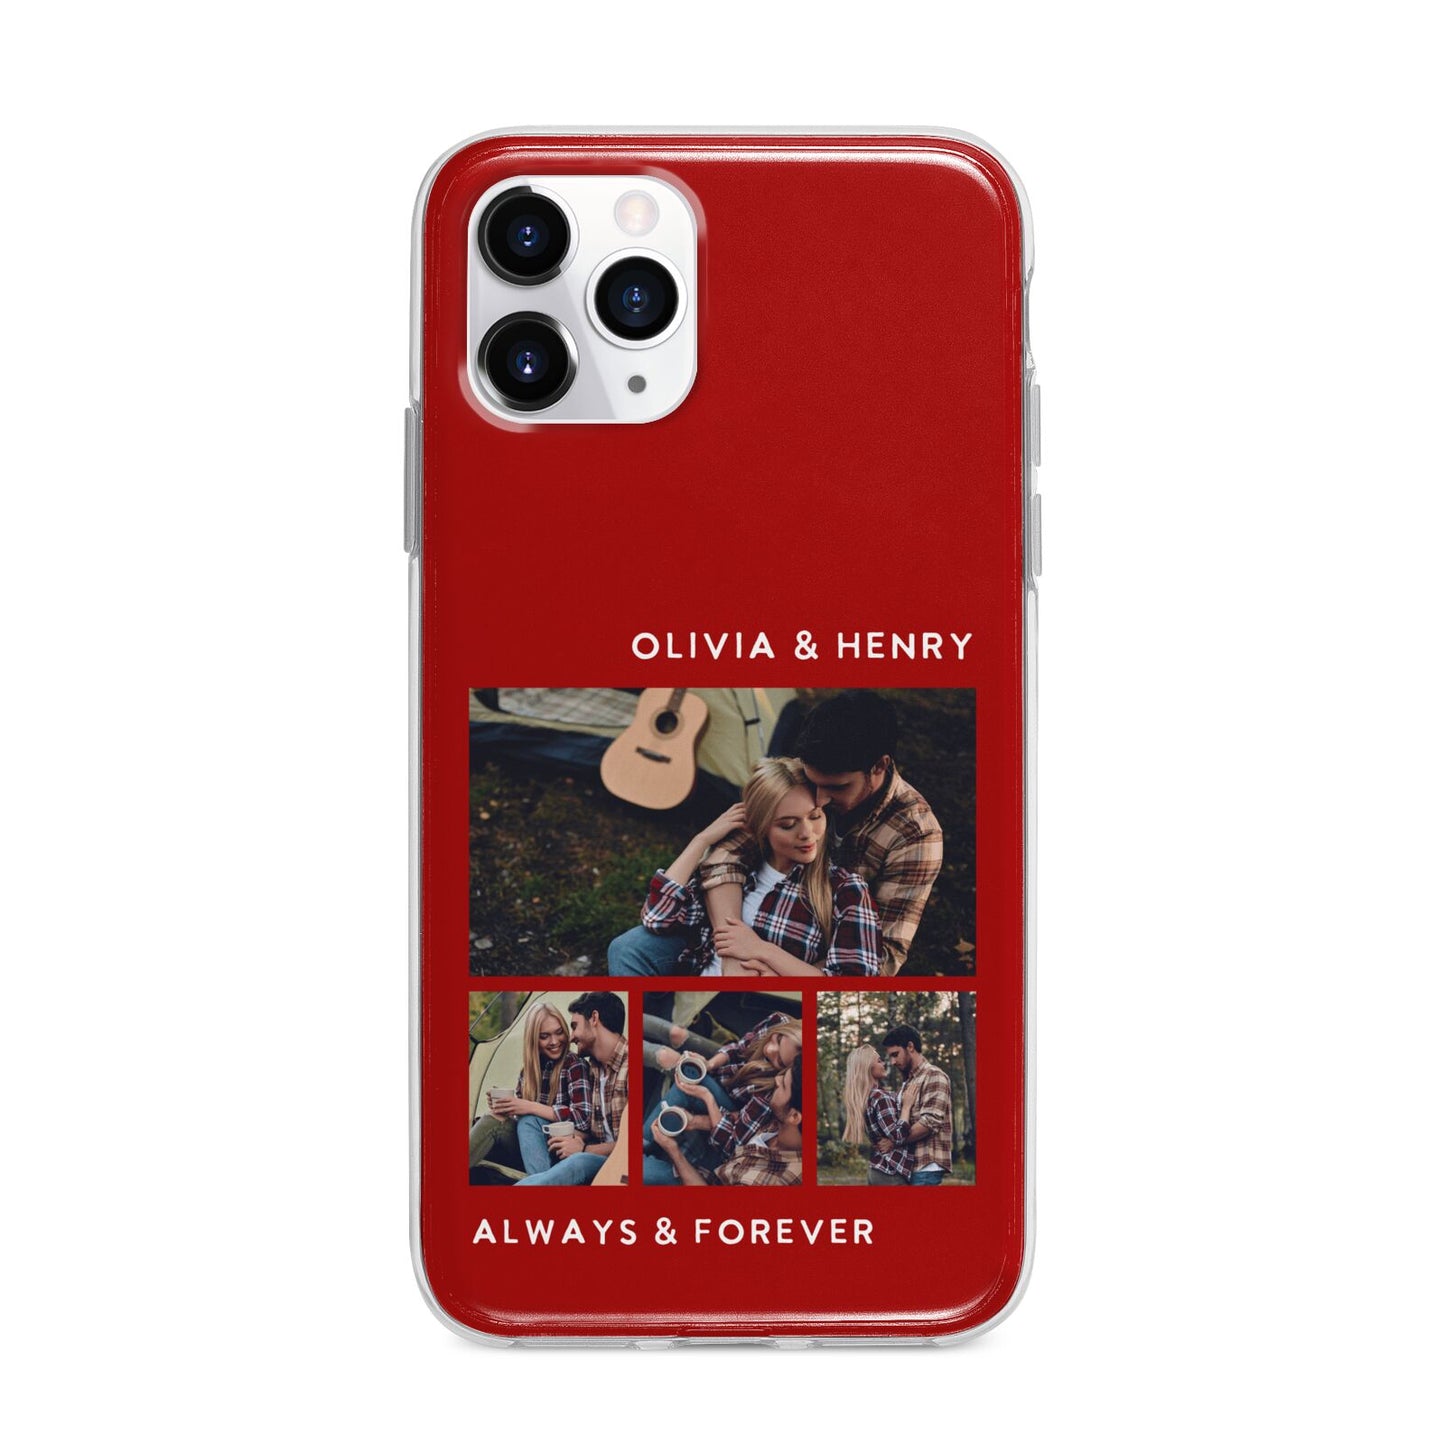 Couples Photo Collage Personalised Apple iPhone 11 Pro in Silver with Bumper Case